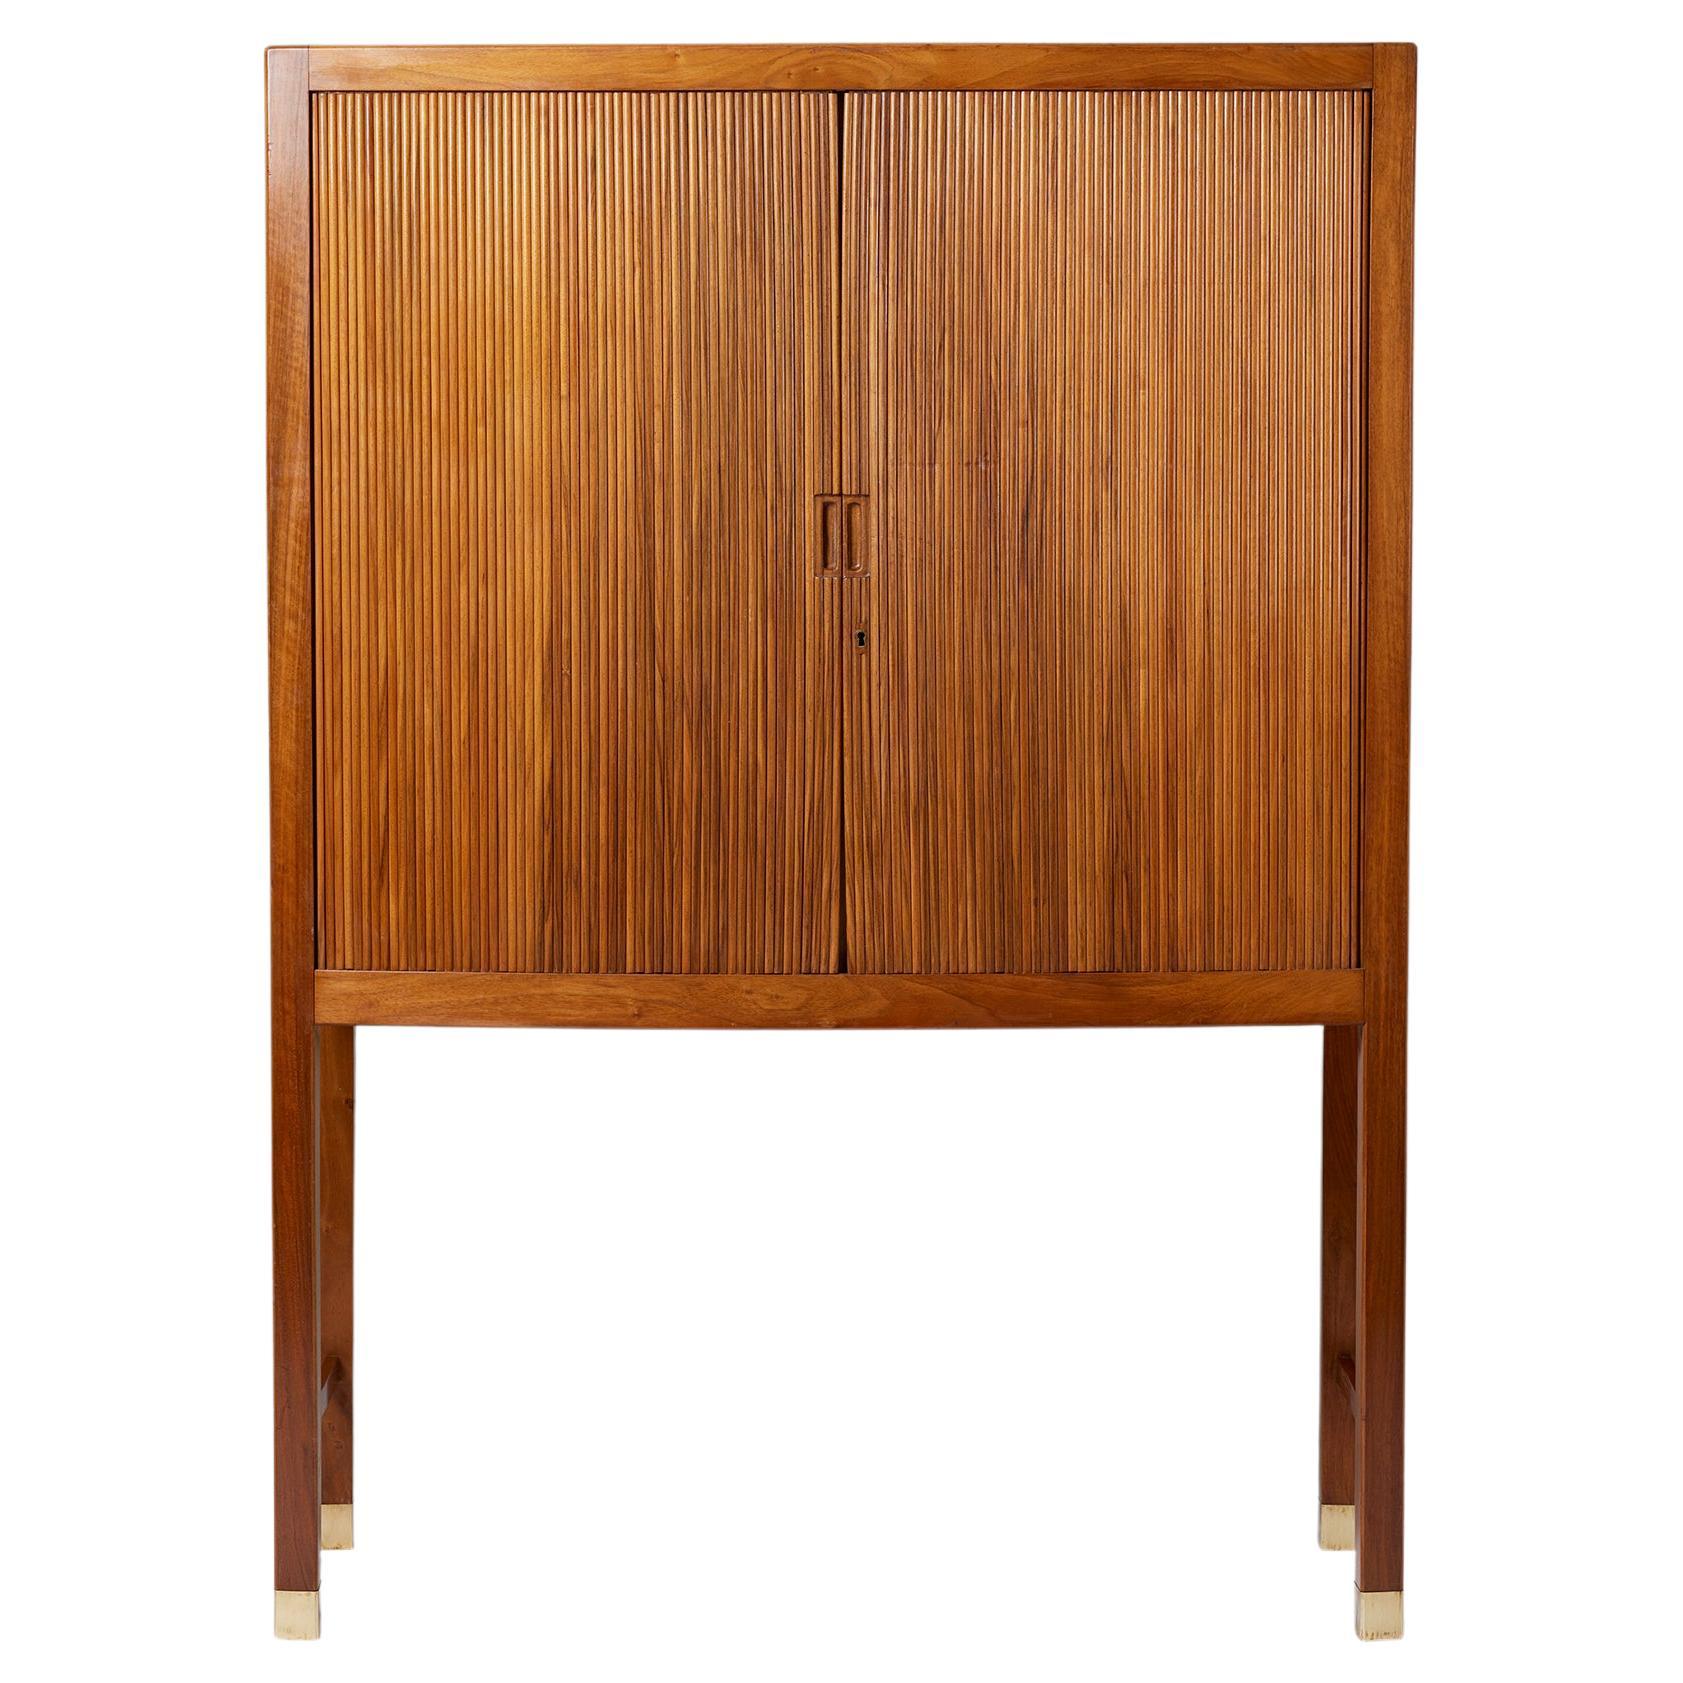 Cabinet with Tambour Doors Designed by a Danish Cabinetmaker, Denmark, 1950s For Sale